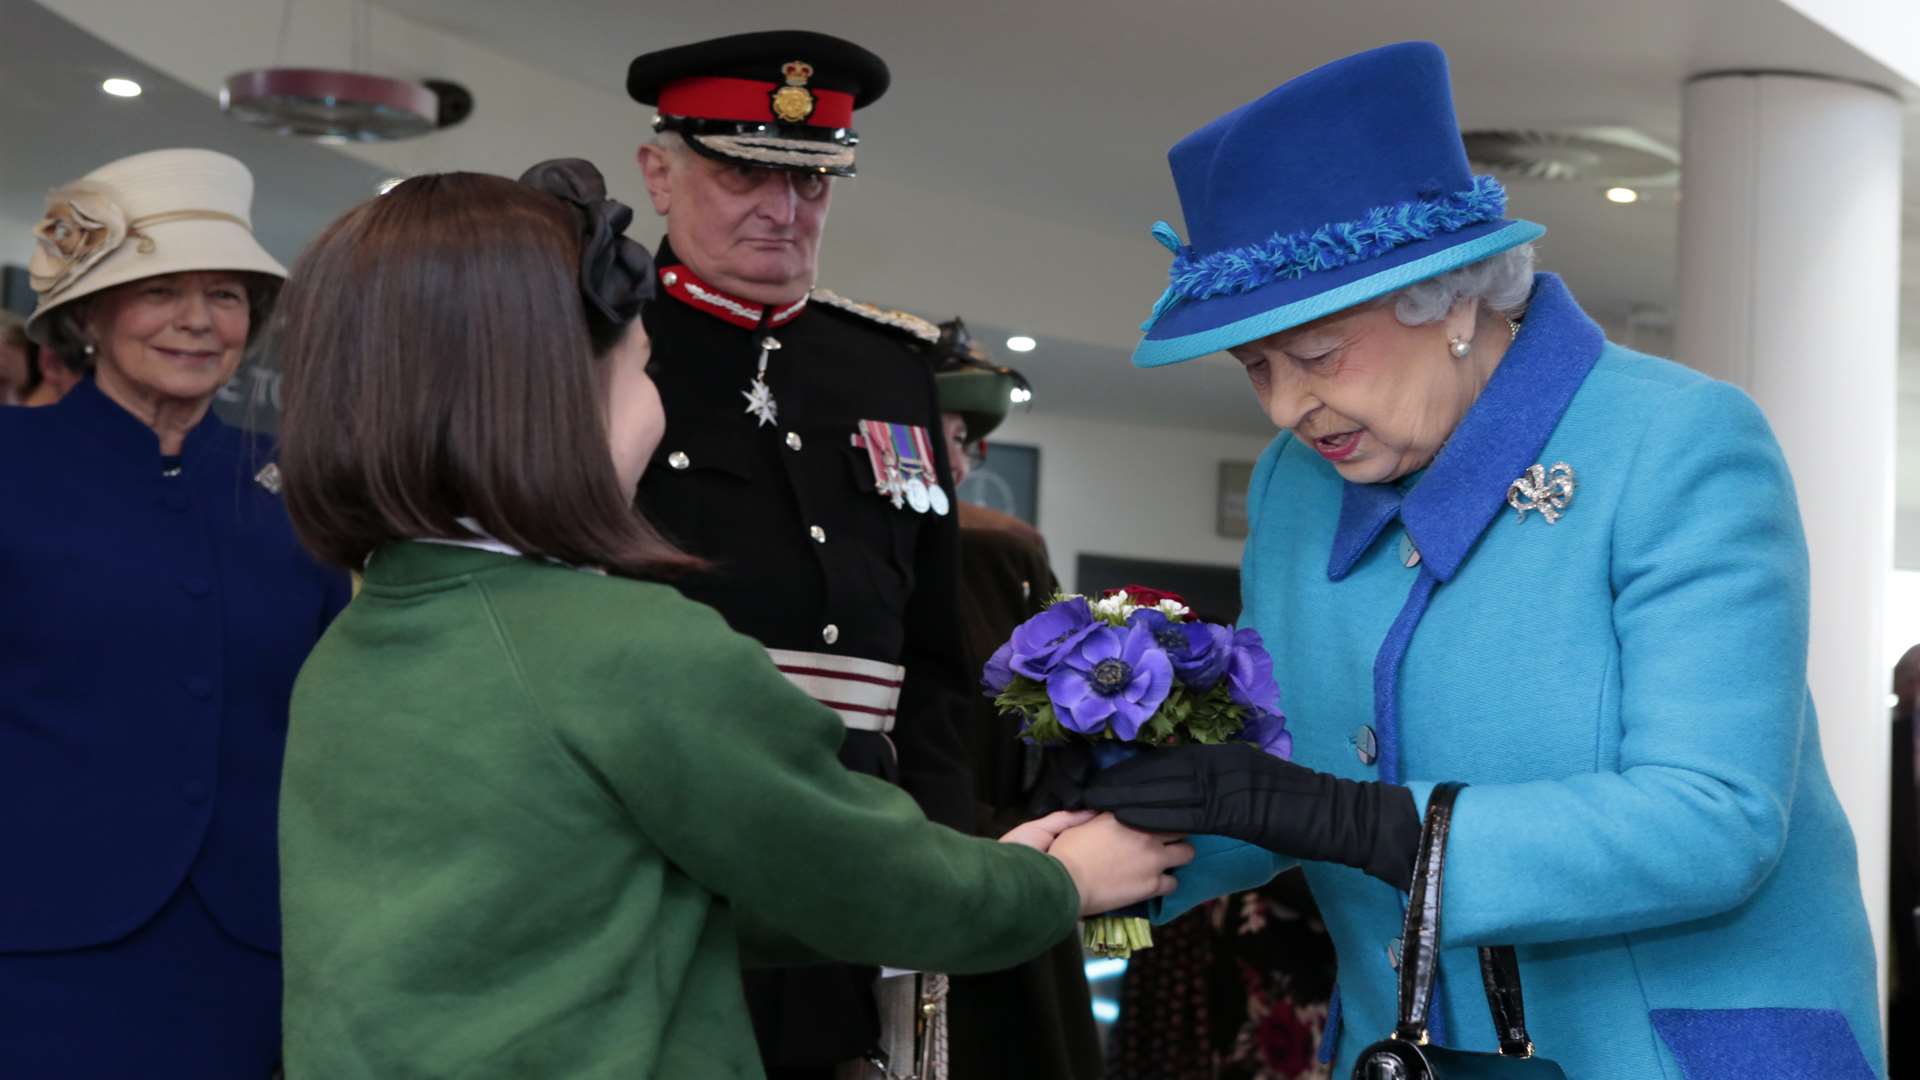 Her Majesty received a posy from Scarlett Stevens from Capel le Ferne Primary School